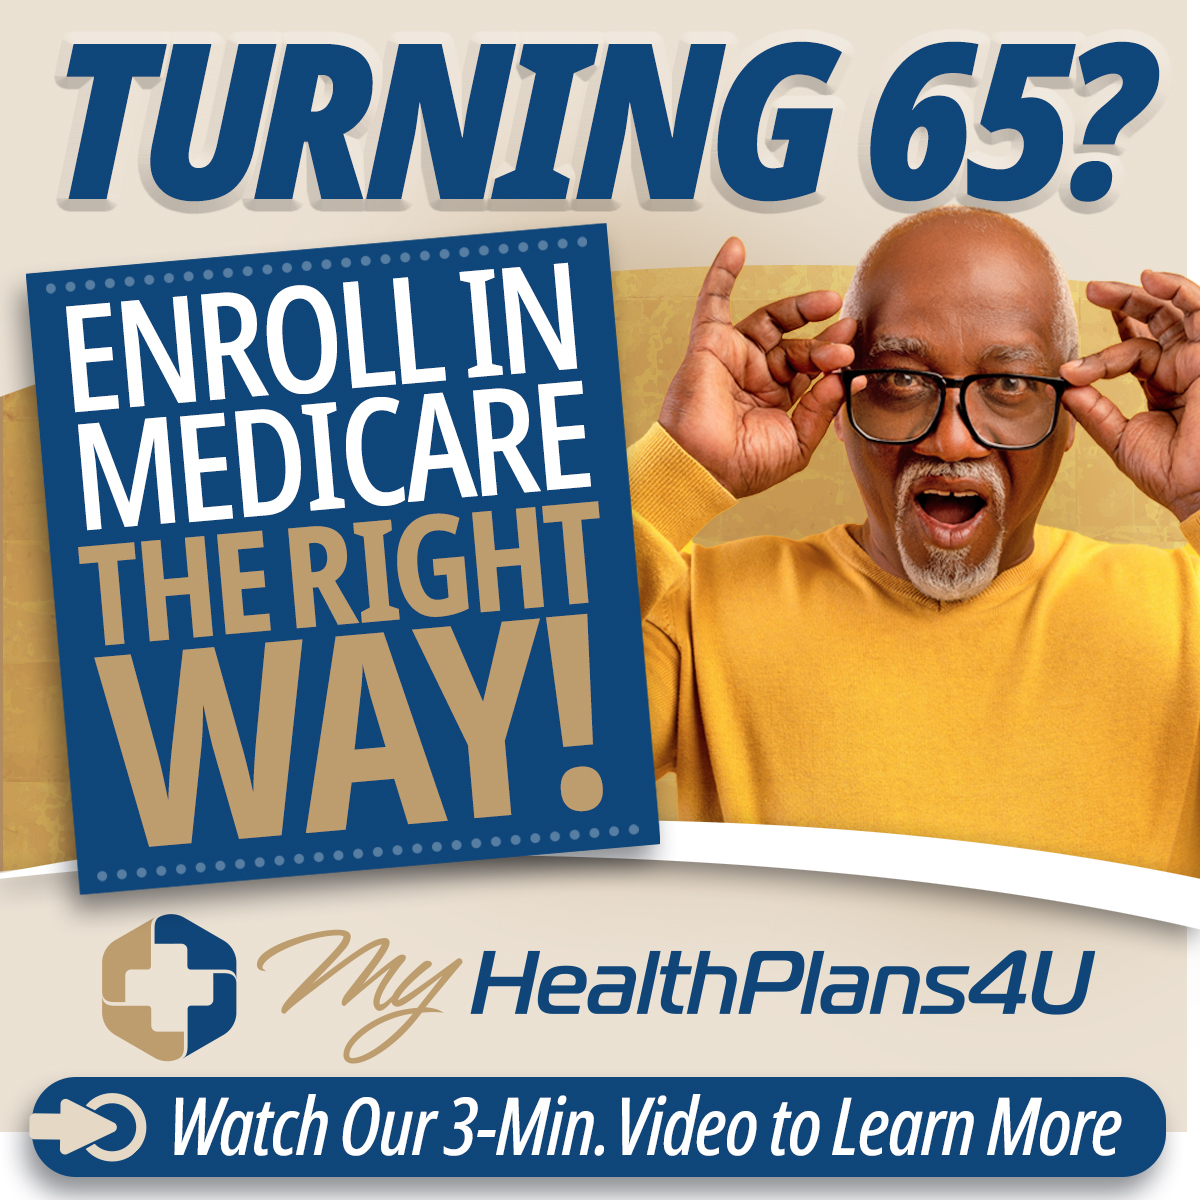 Turning 65? Enroll in Medicare the right way! Watch our three-minute video to learn more.